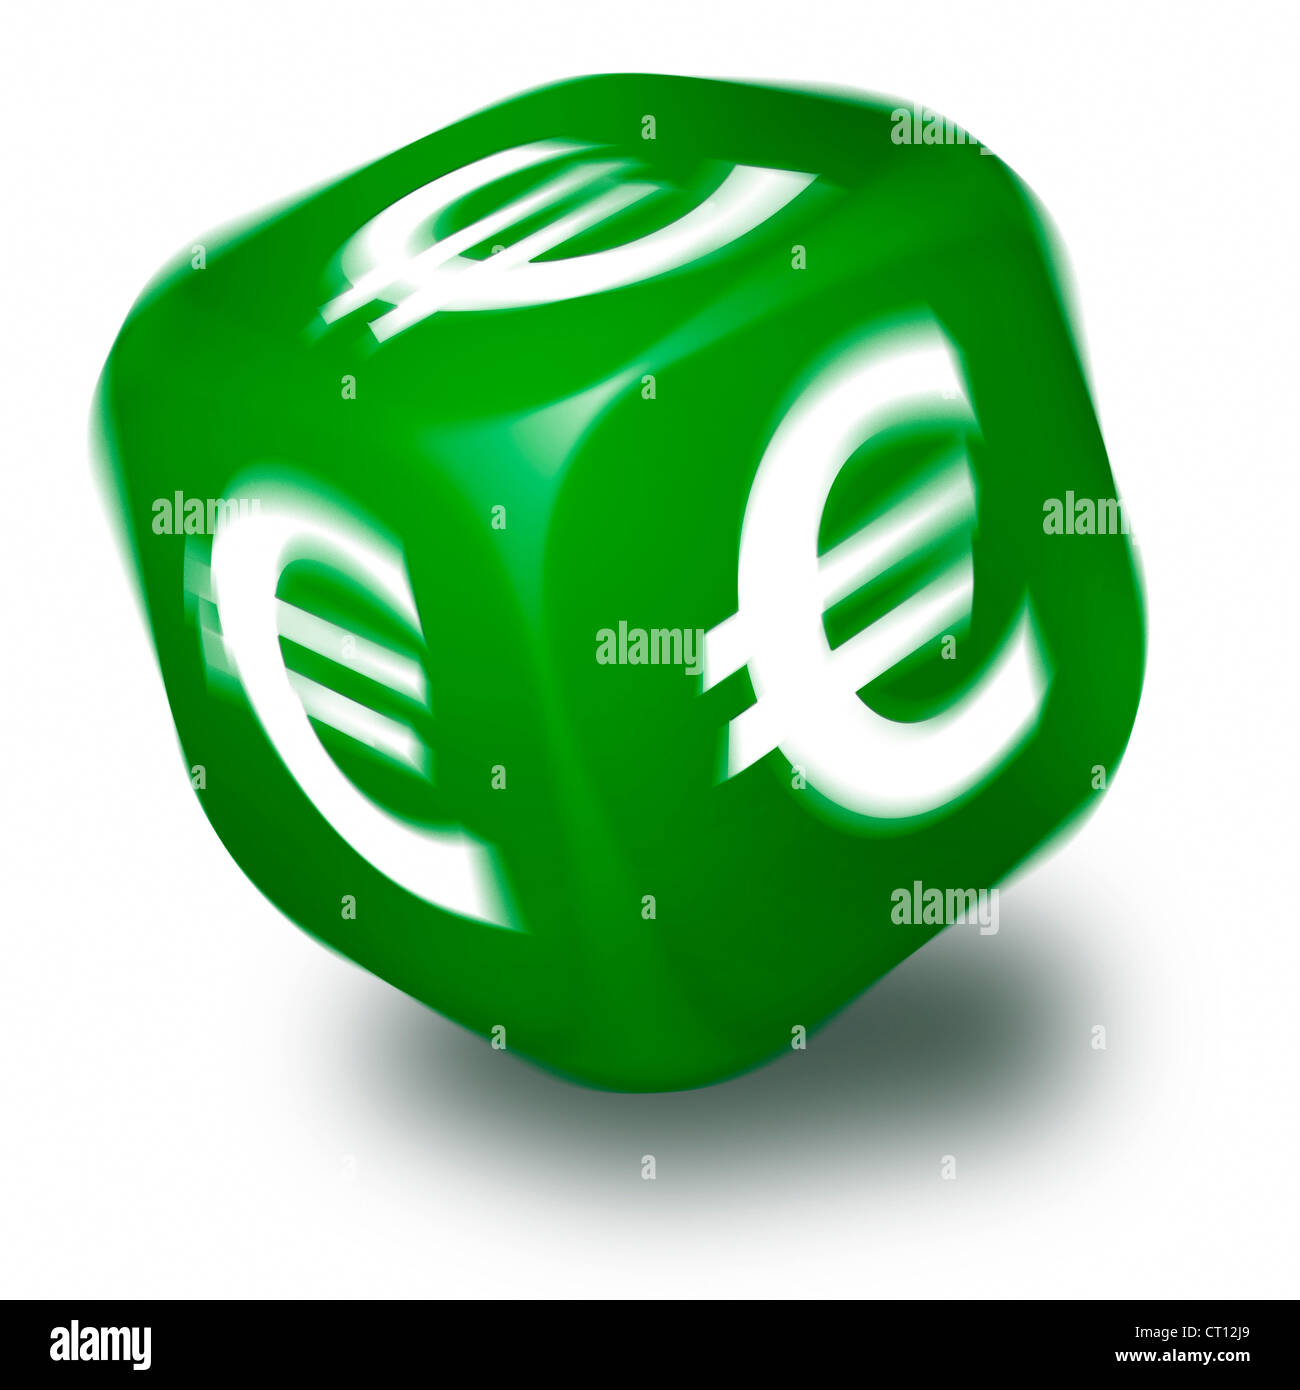 Spinning green dice with the Euro symbol printed on each face Stock Photo